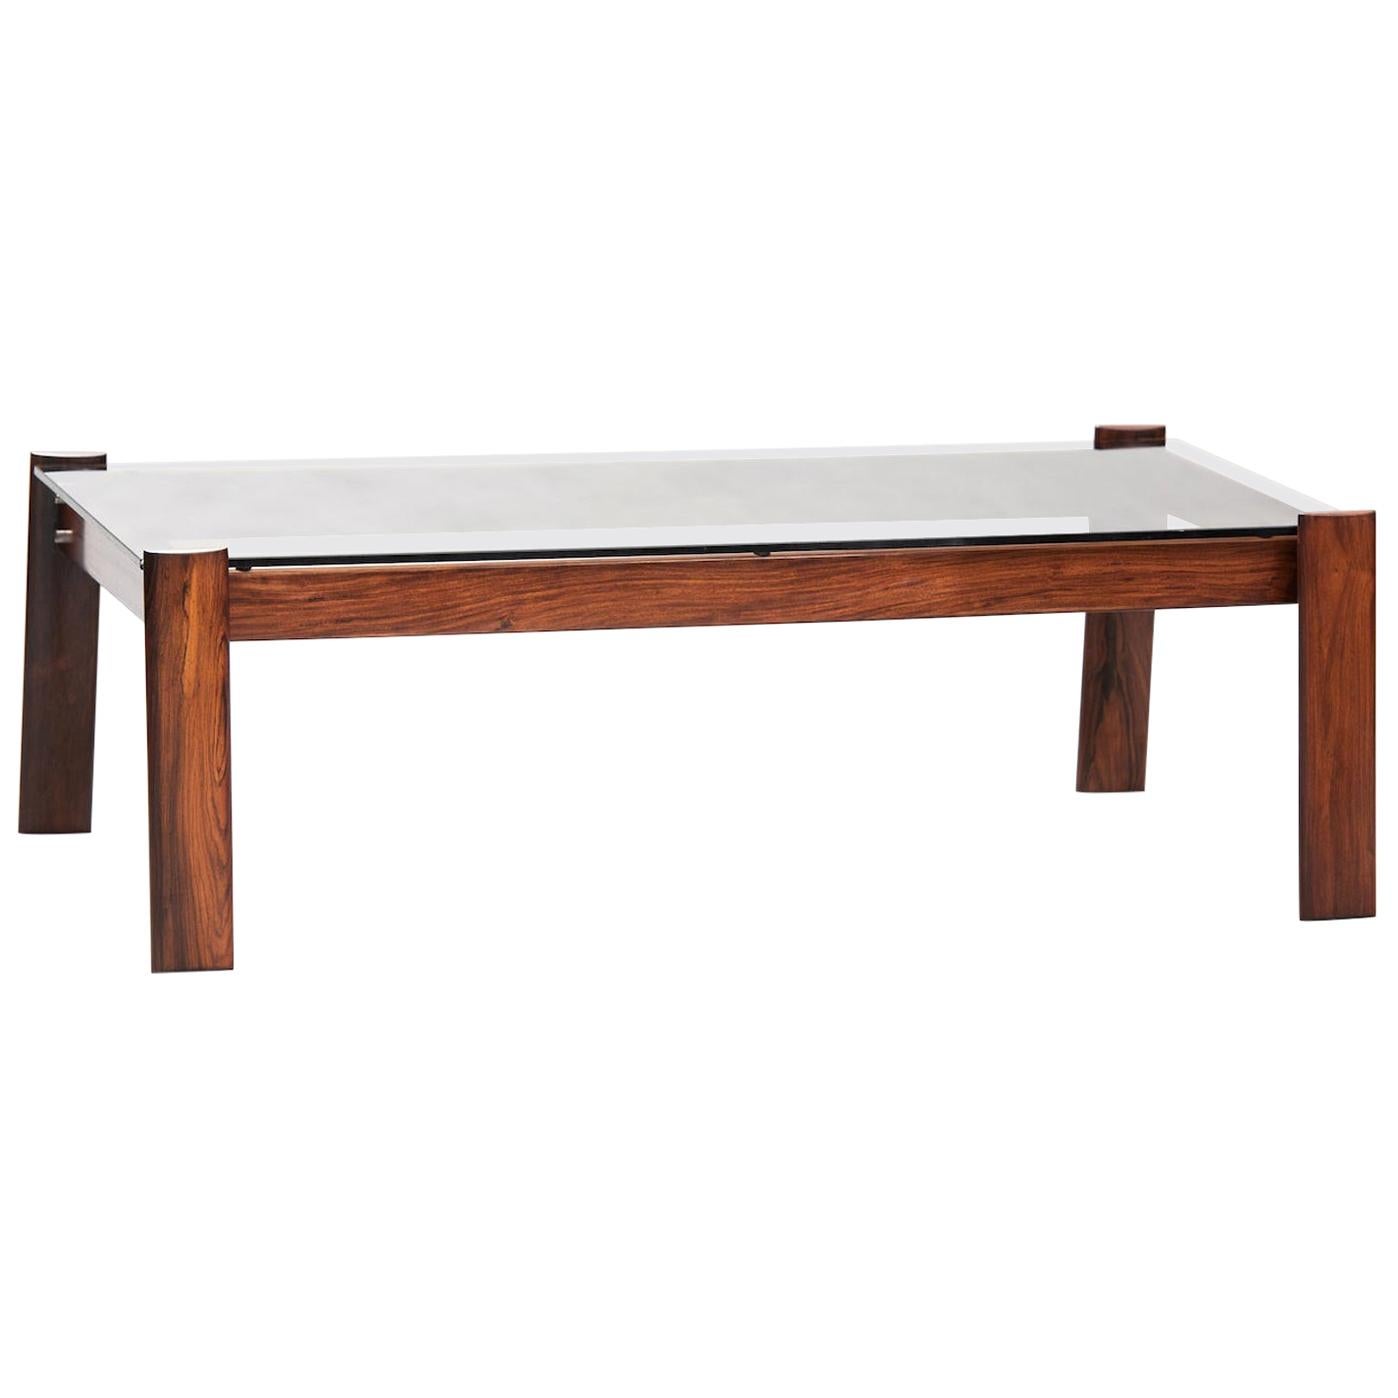 Mid-Century Modern Percival Lafer Hardwood Coffee Table for Lafer